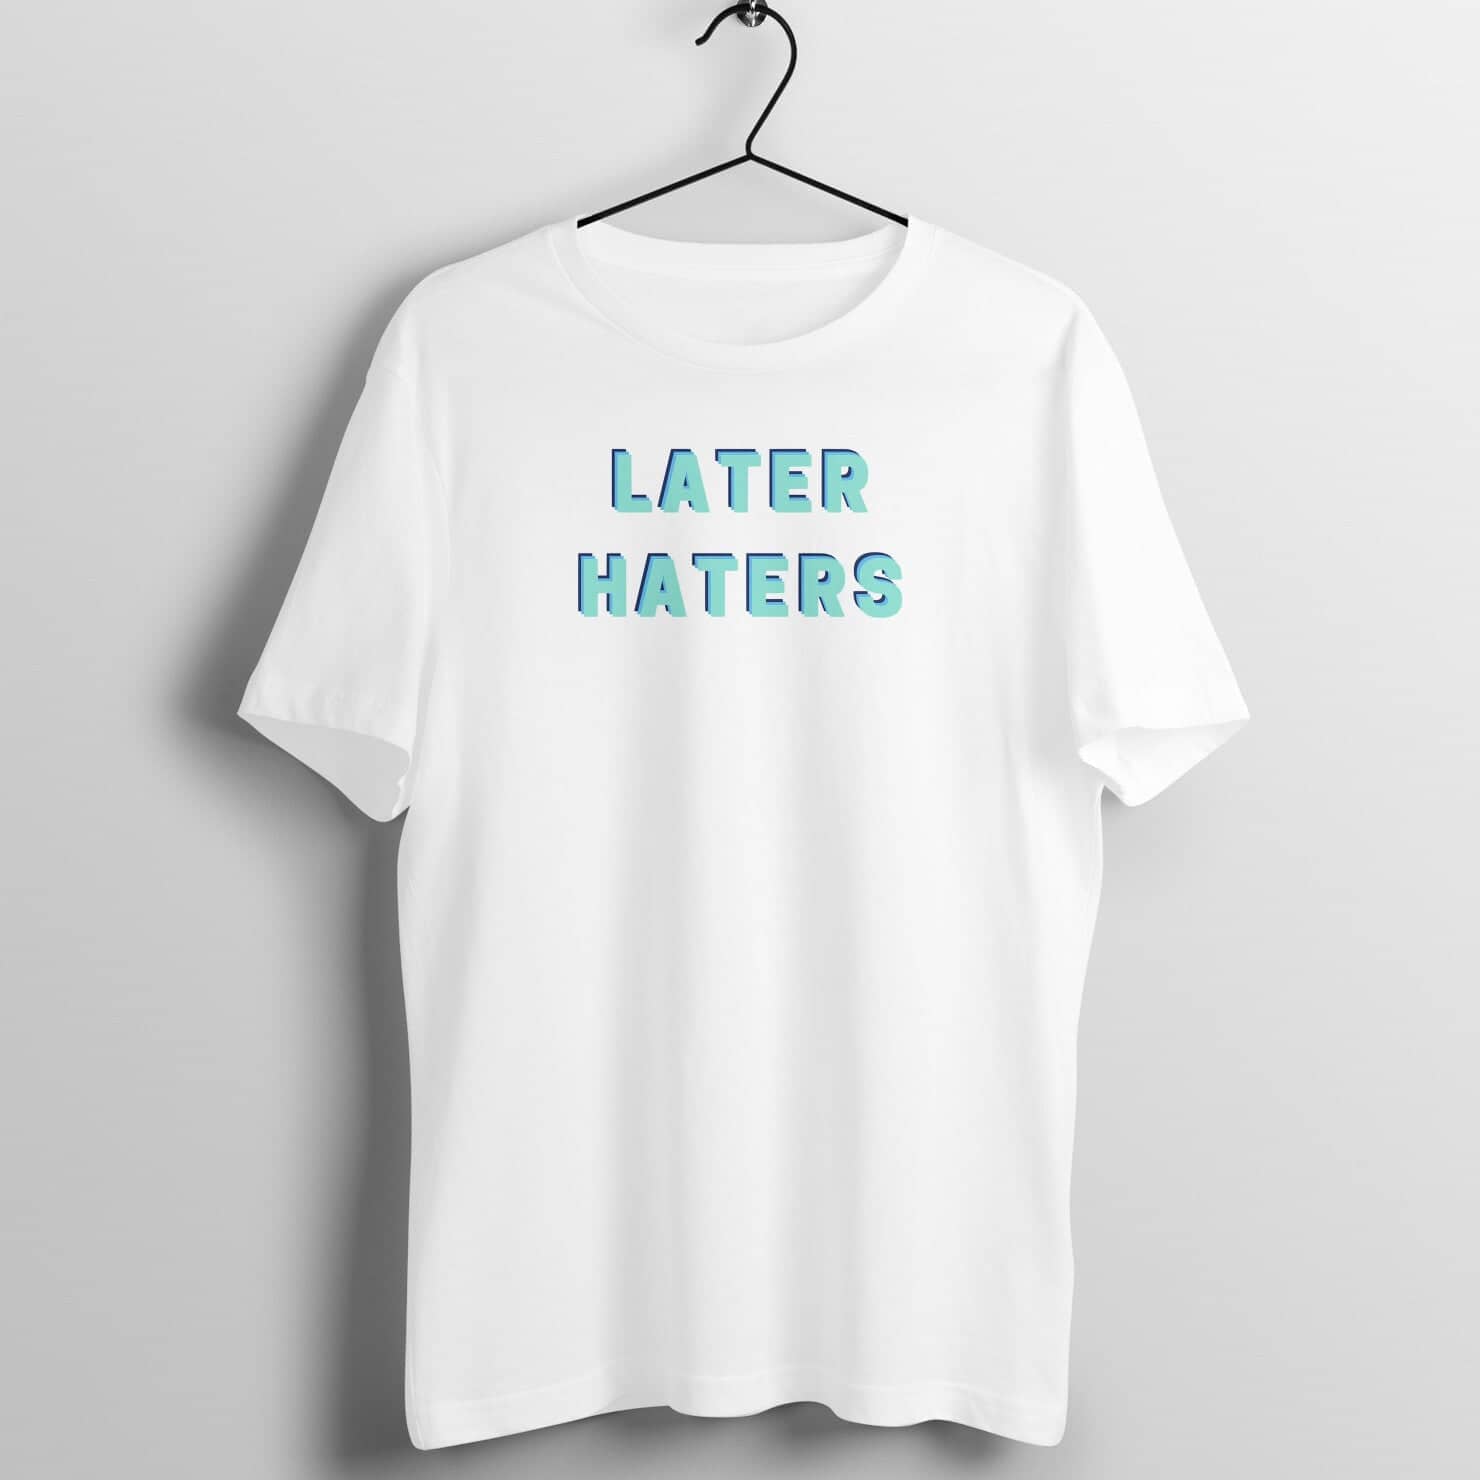 Later Haters Supreme White T Shirt for Men and Women freeshipping - Catch My Drift India